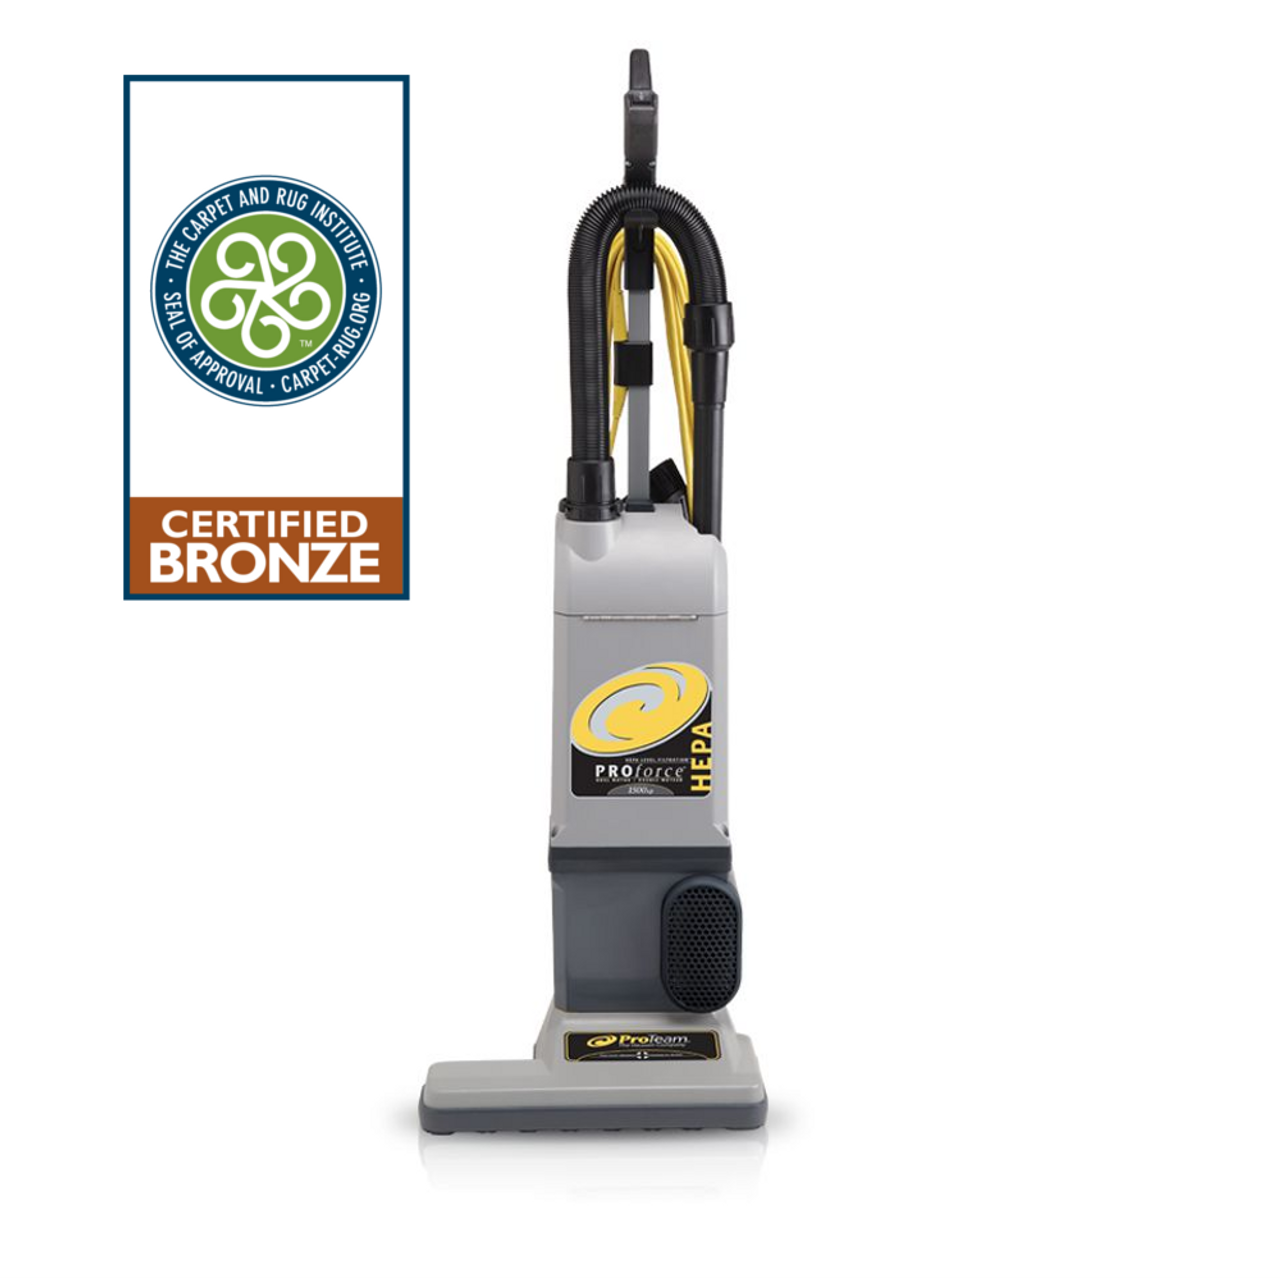 Provides exceptional cleaning in a high-filtration upright to improve reach, durability, and soil removal with HEPA filtration.